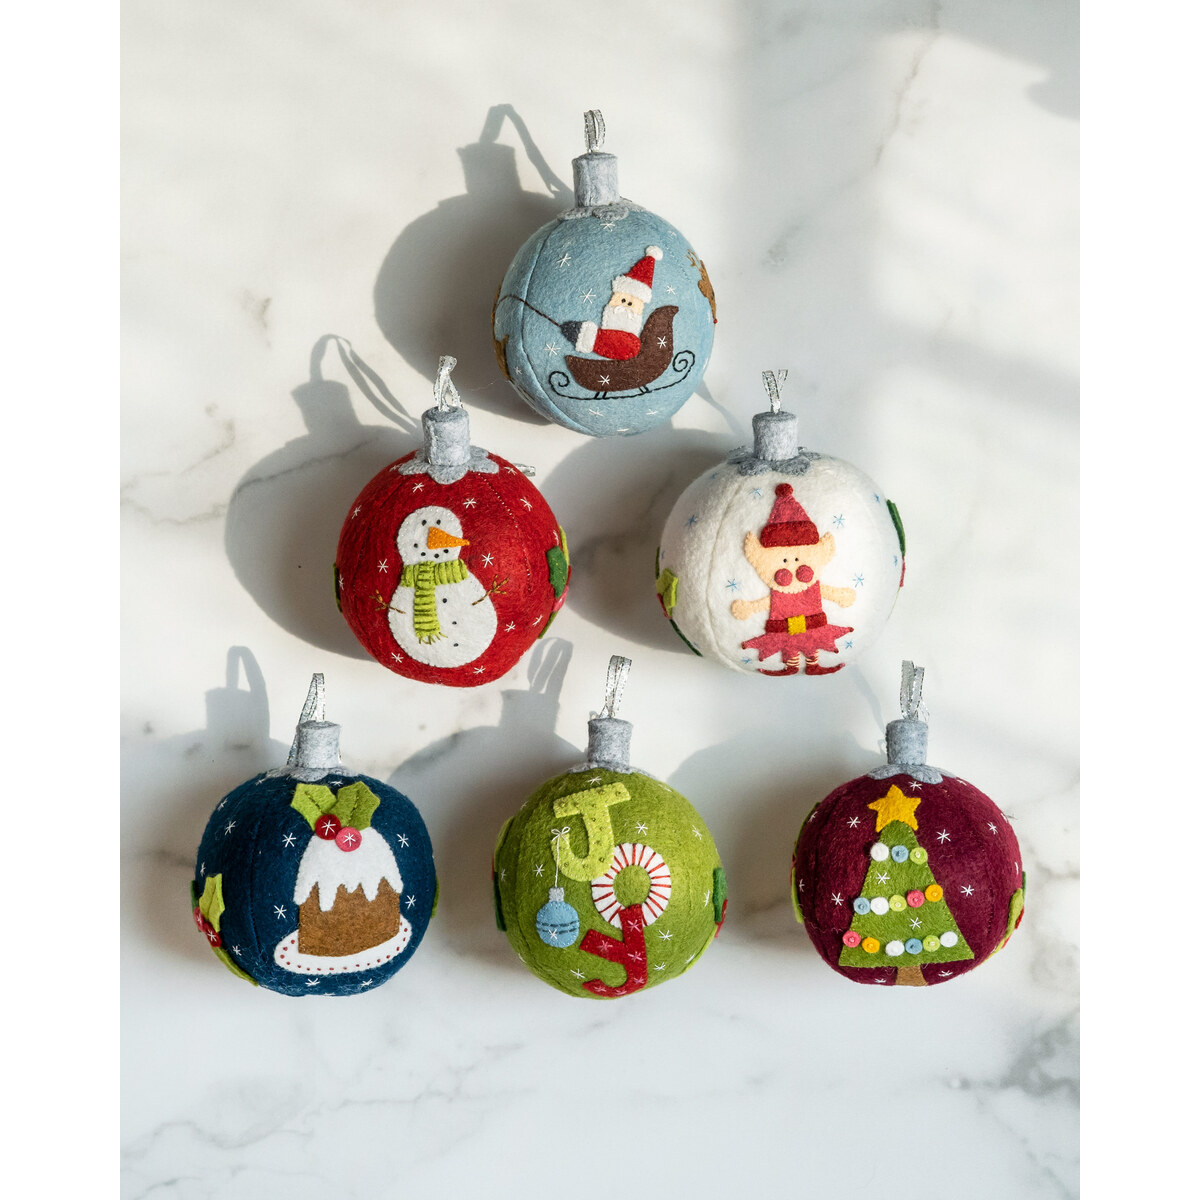 Everything Nice Ornament Kit - RESERVE